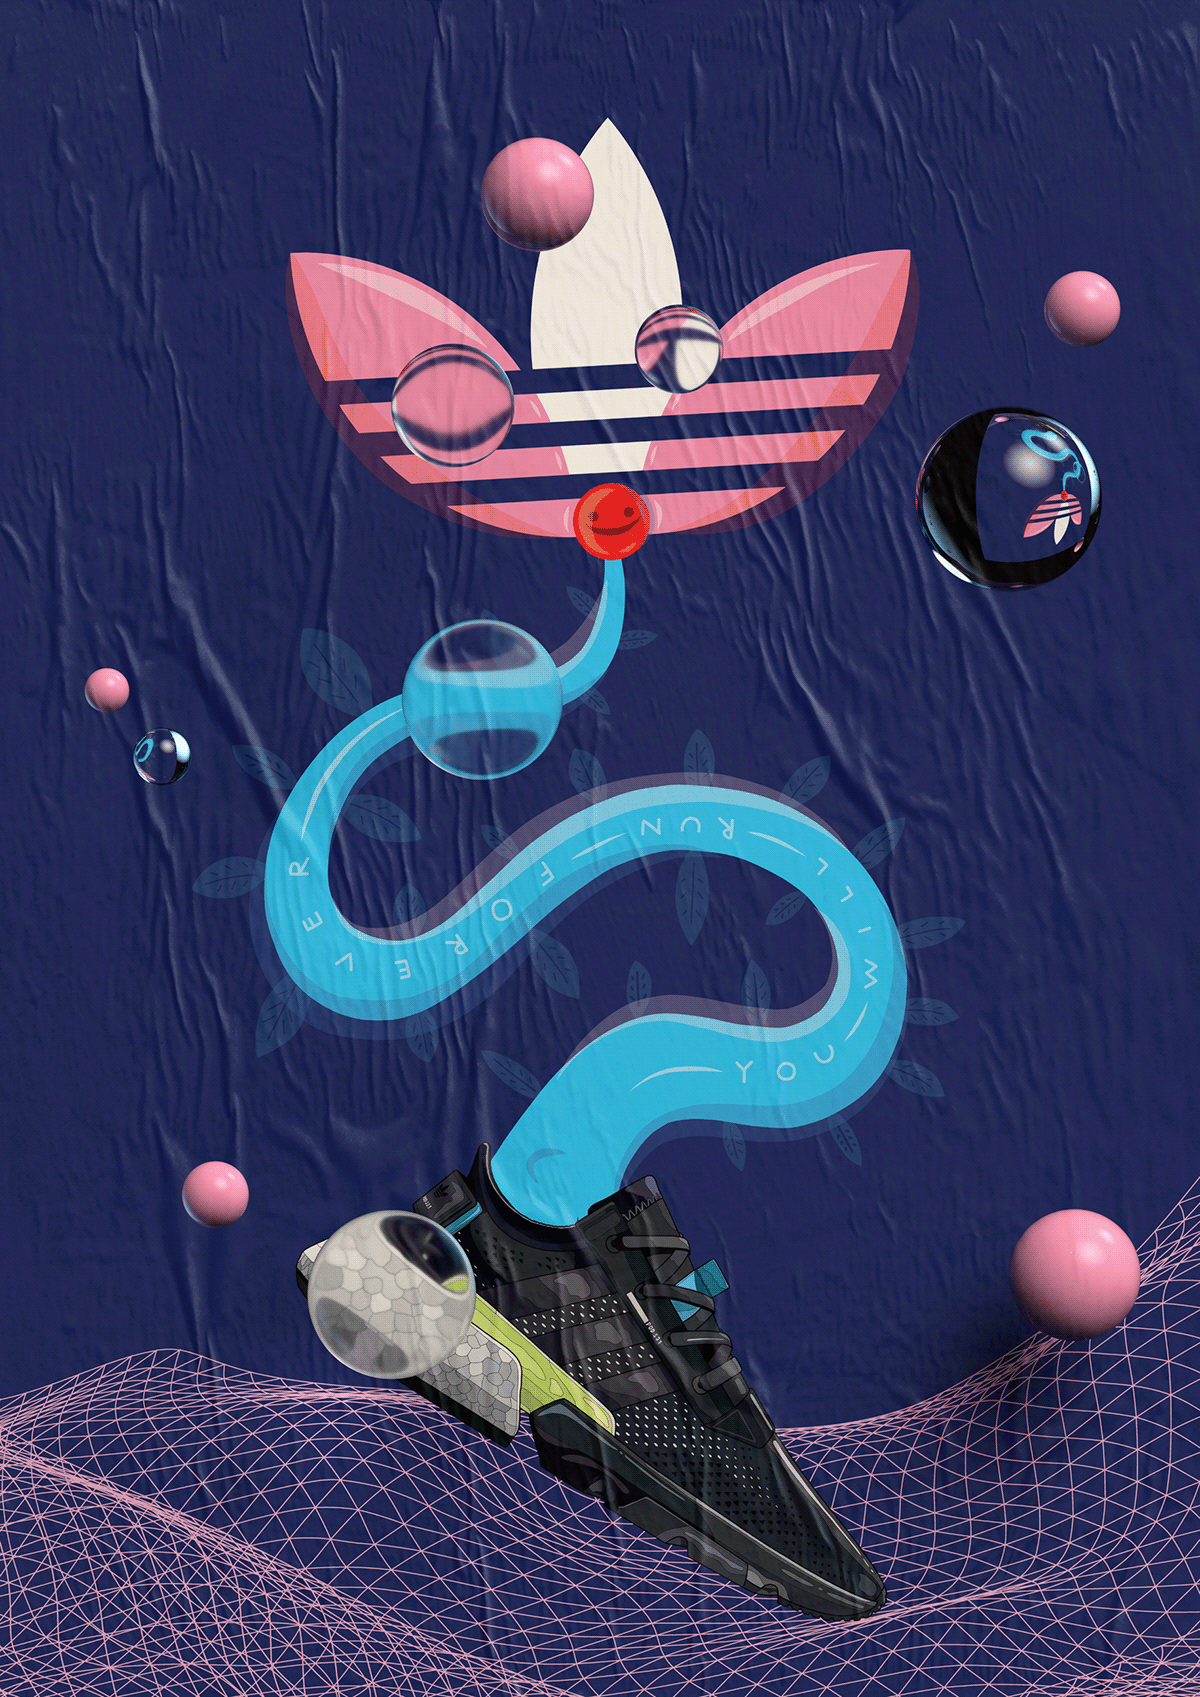 Adidas Originals P.O.D. System experience on Behance